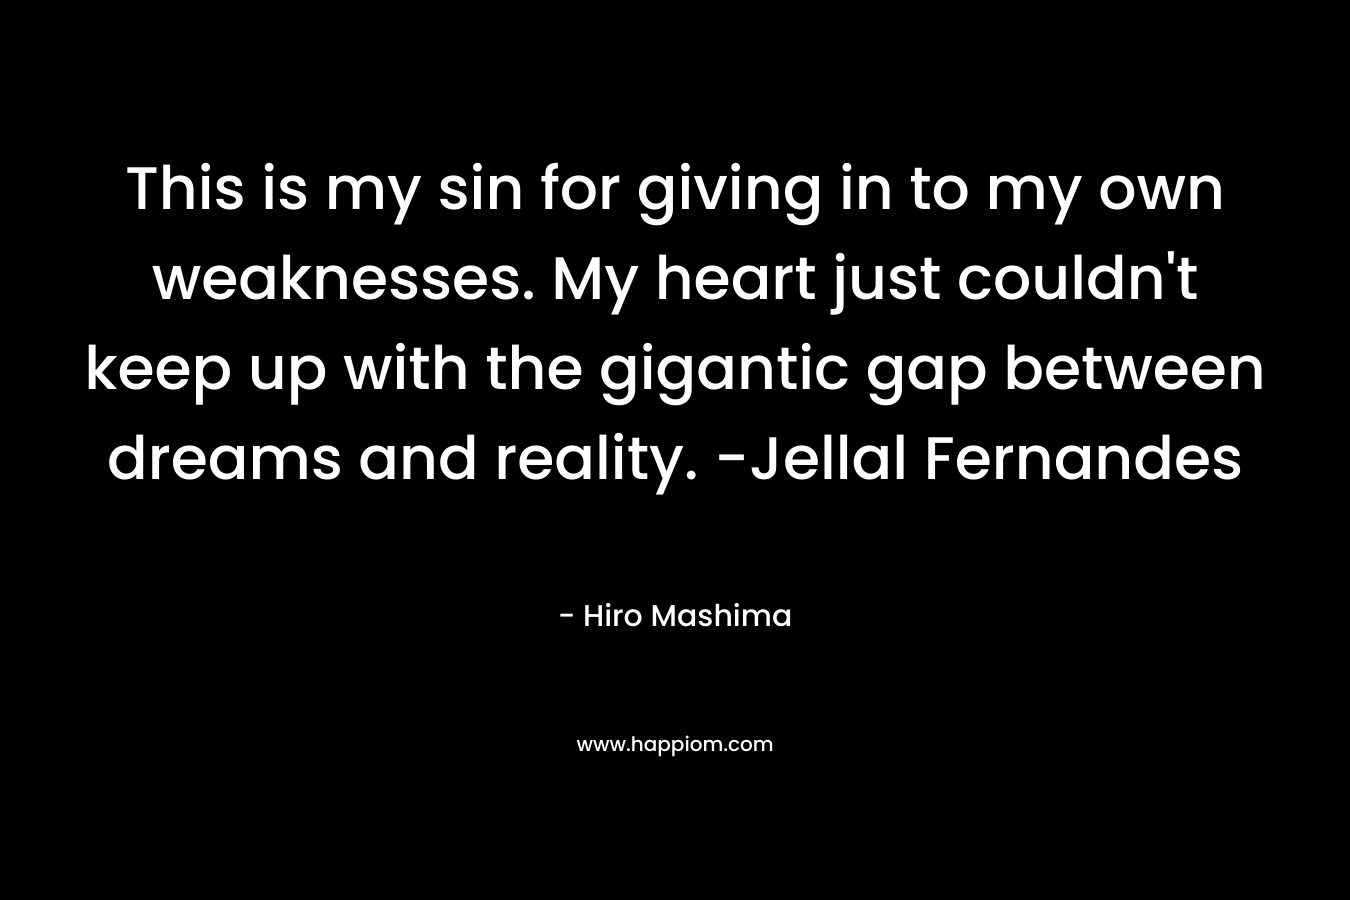 This is my sin for giving in to my own weaknesses. My heart just couldn't keep up with the gigantic gap between dreams and reality. -Jellal Fernandes